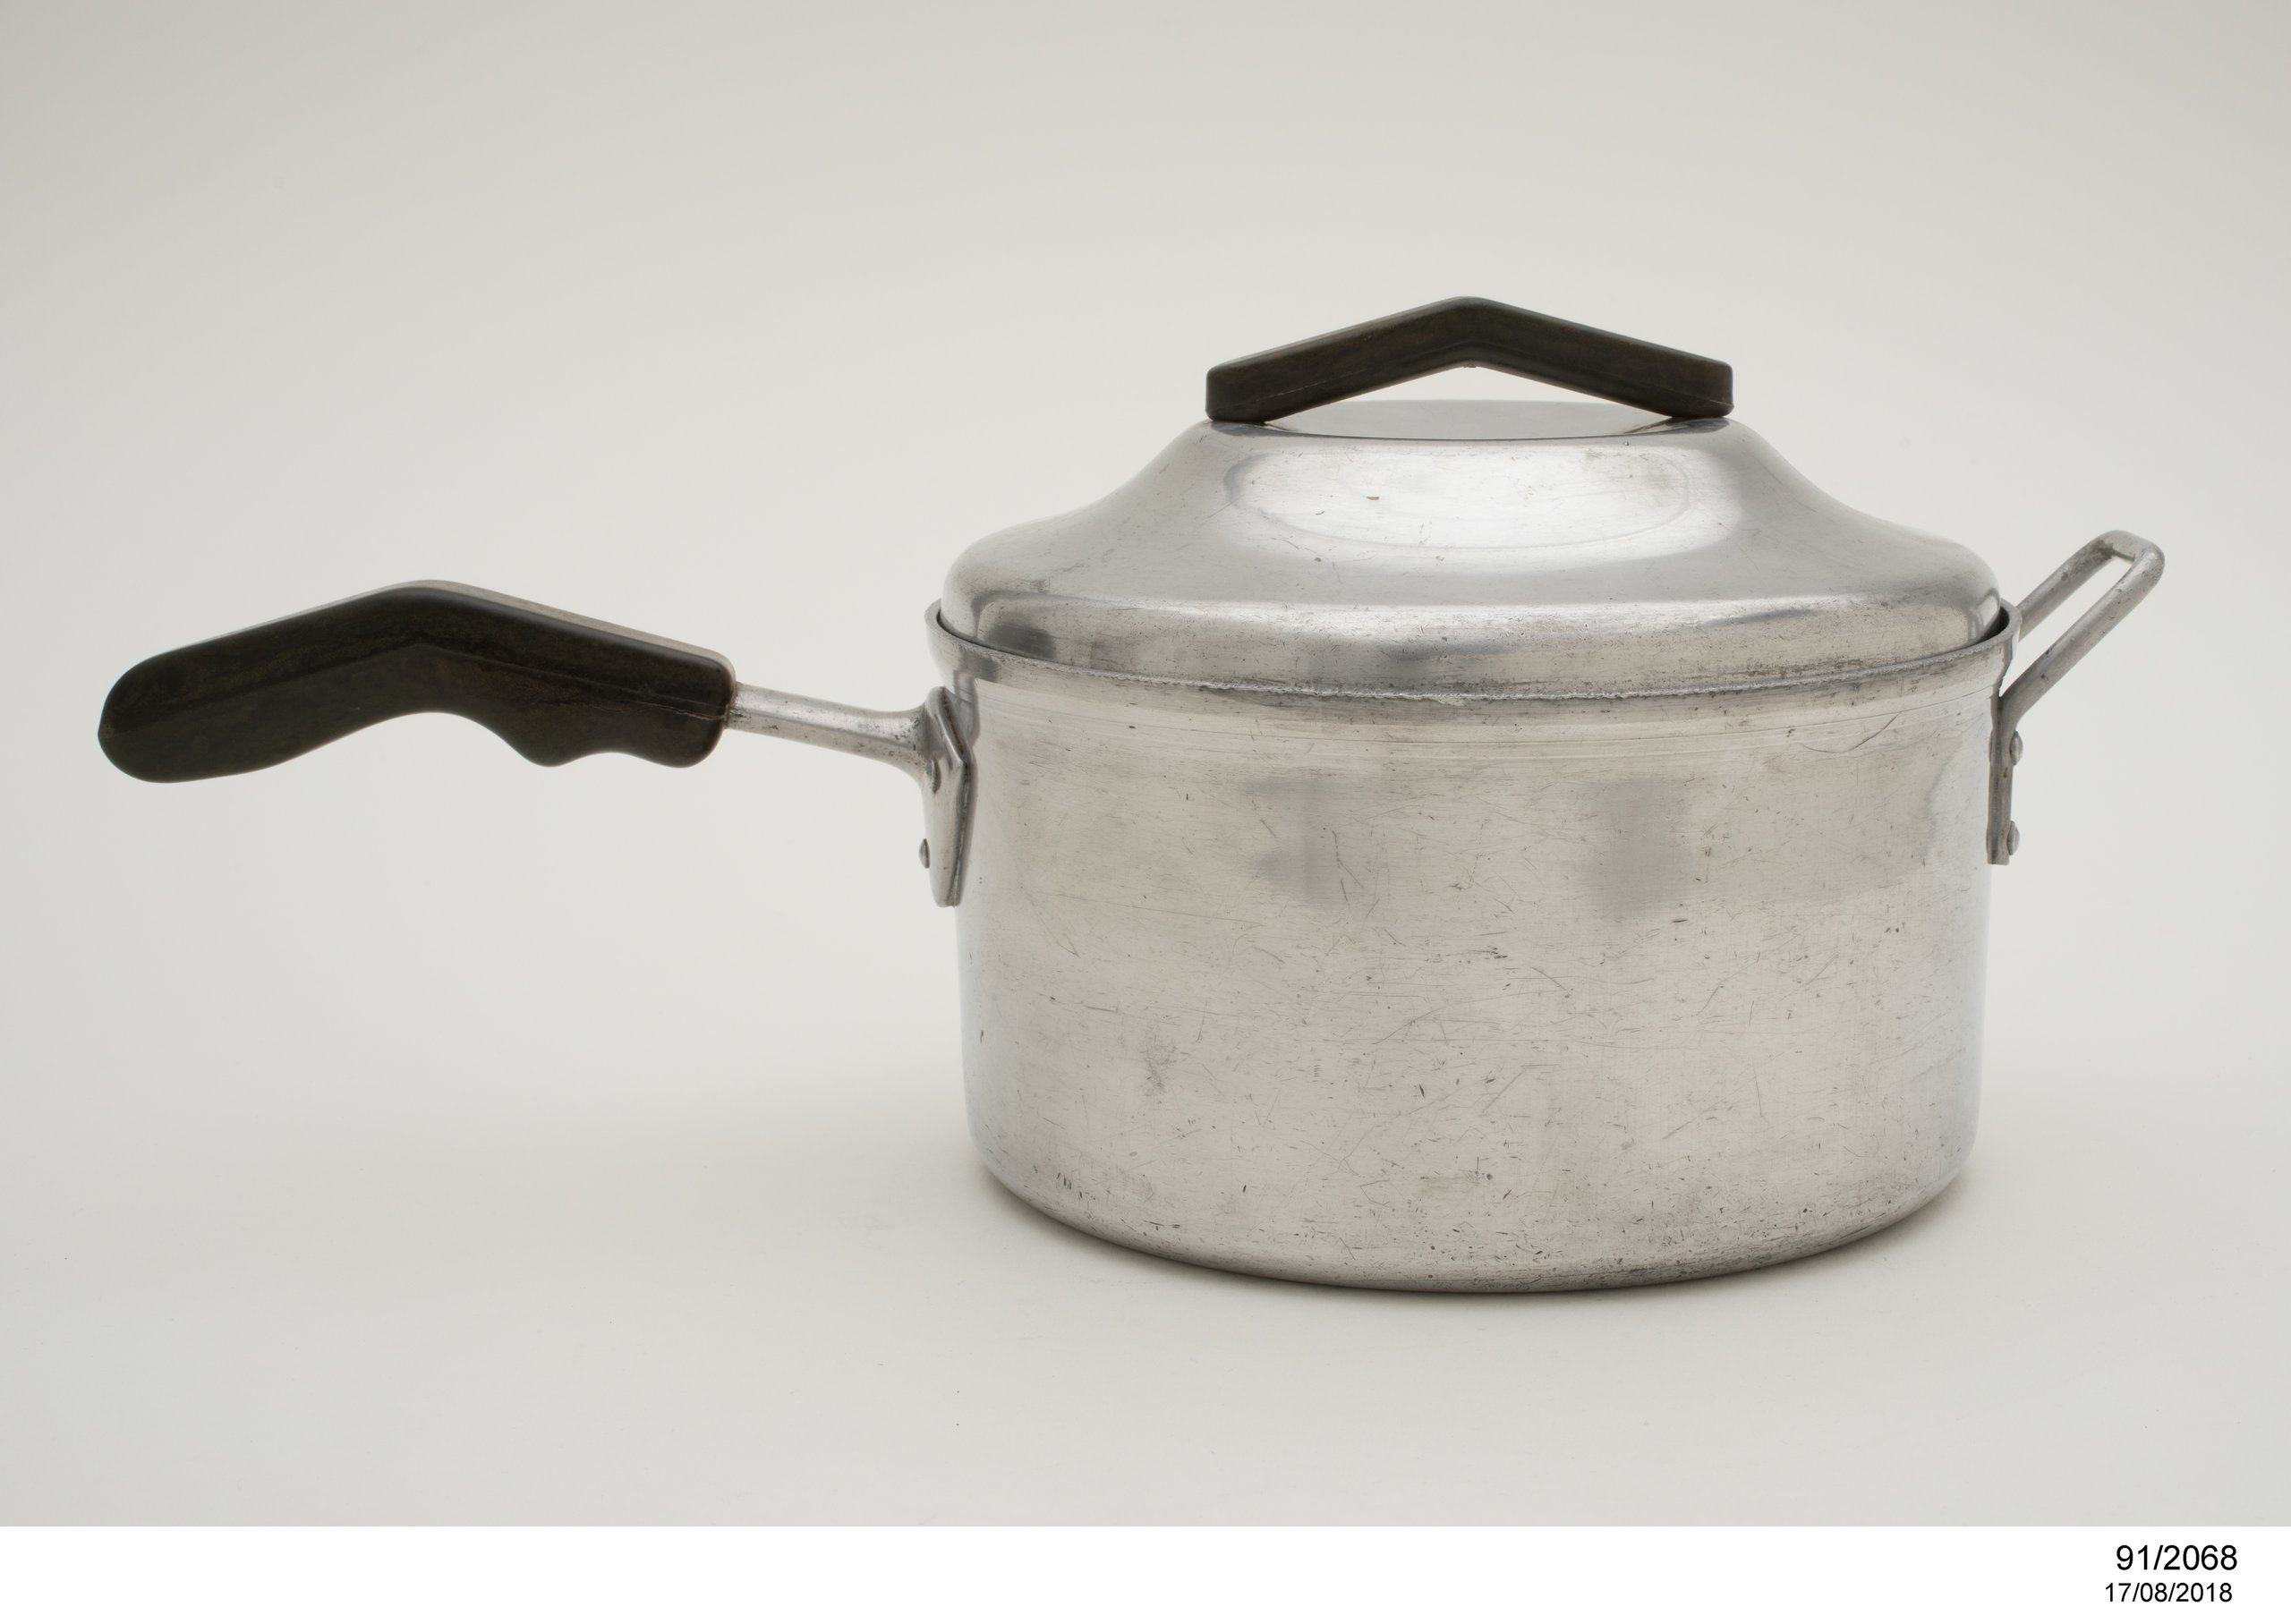 Saucepan with lid designed by Gordon Andrews